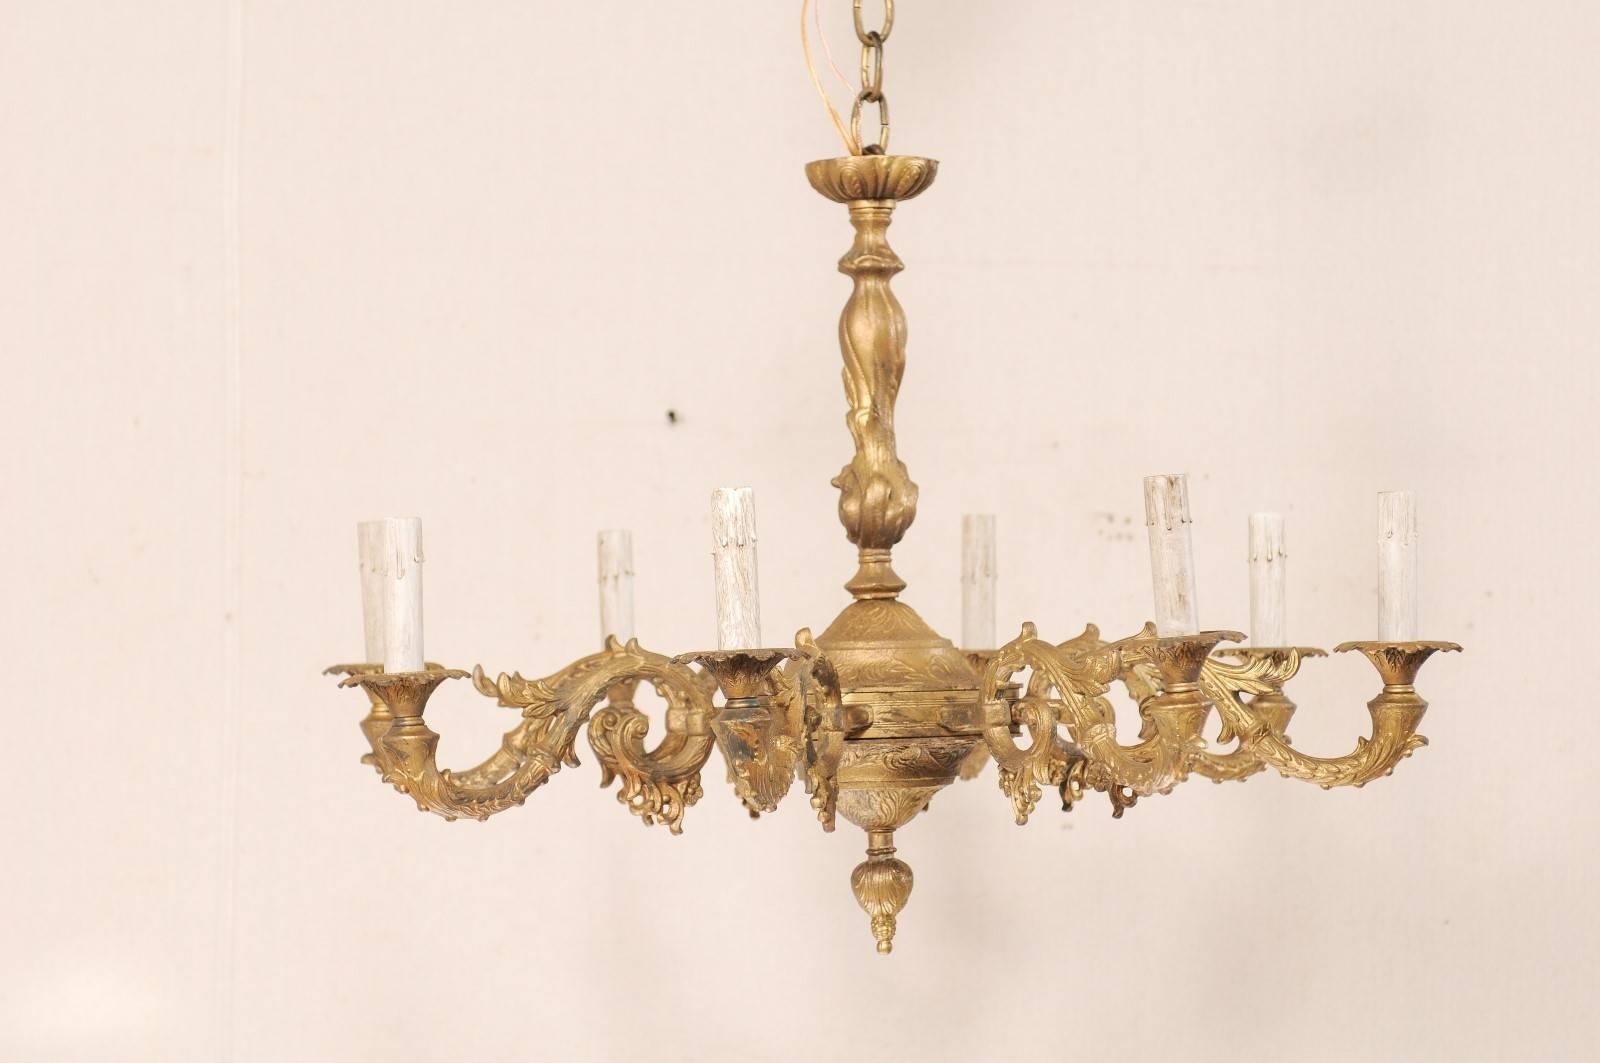 A vintage French eight-light painted gold metal chandelier. This French chandelier features eight S-scrolling shape arms reaching out from the central column to create a circular shape and terminate into the bobèches and painted candle sleeves. The